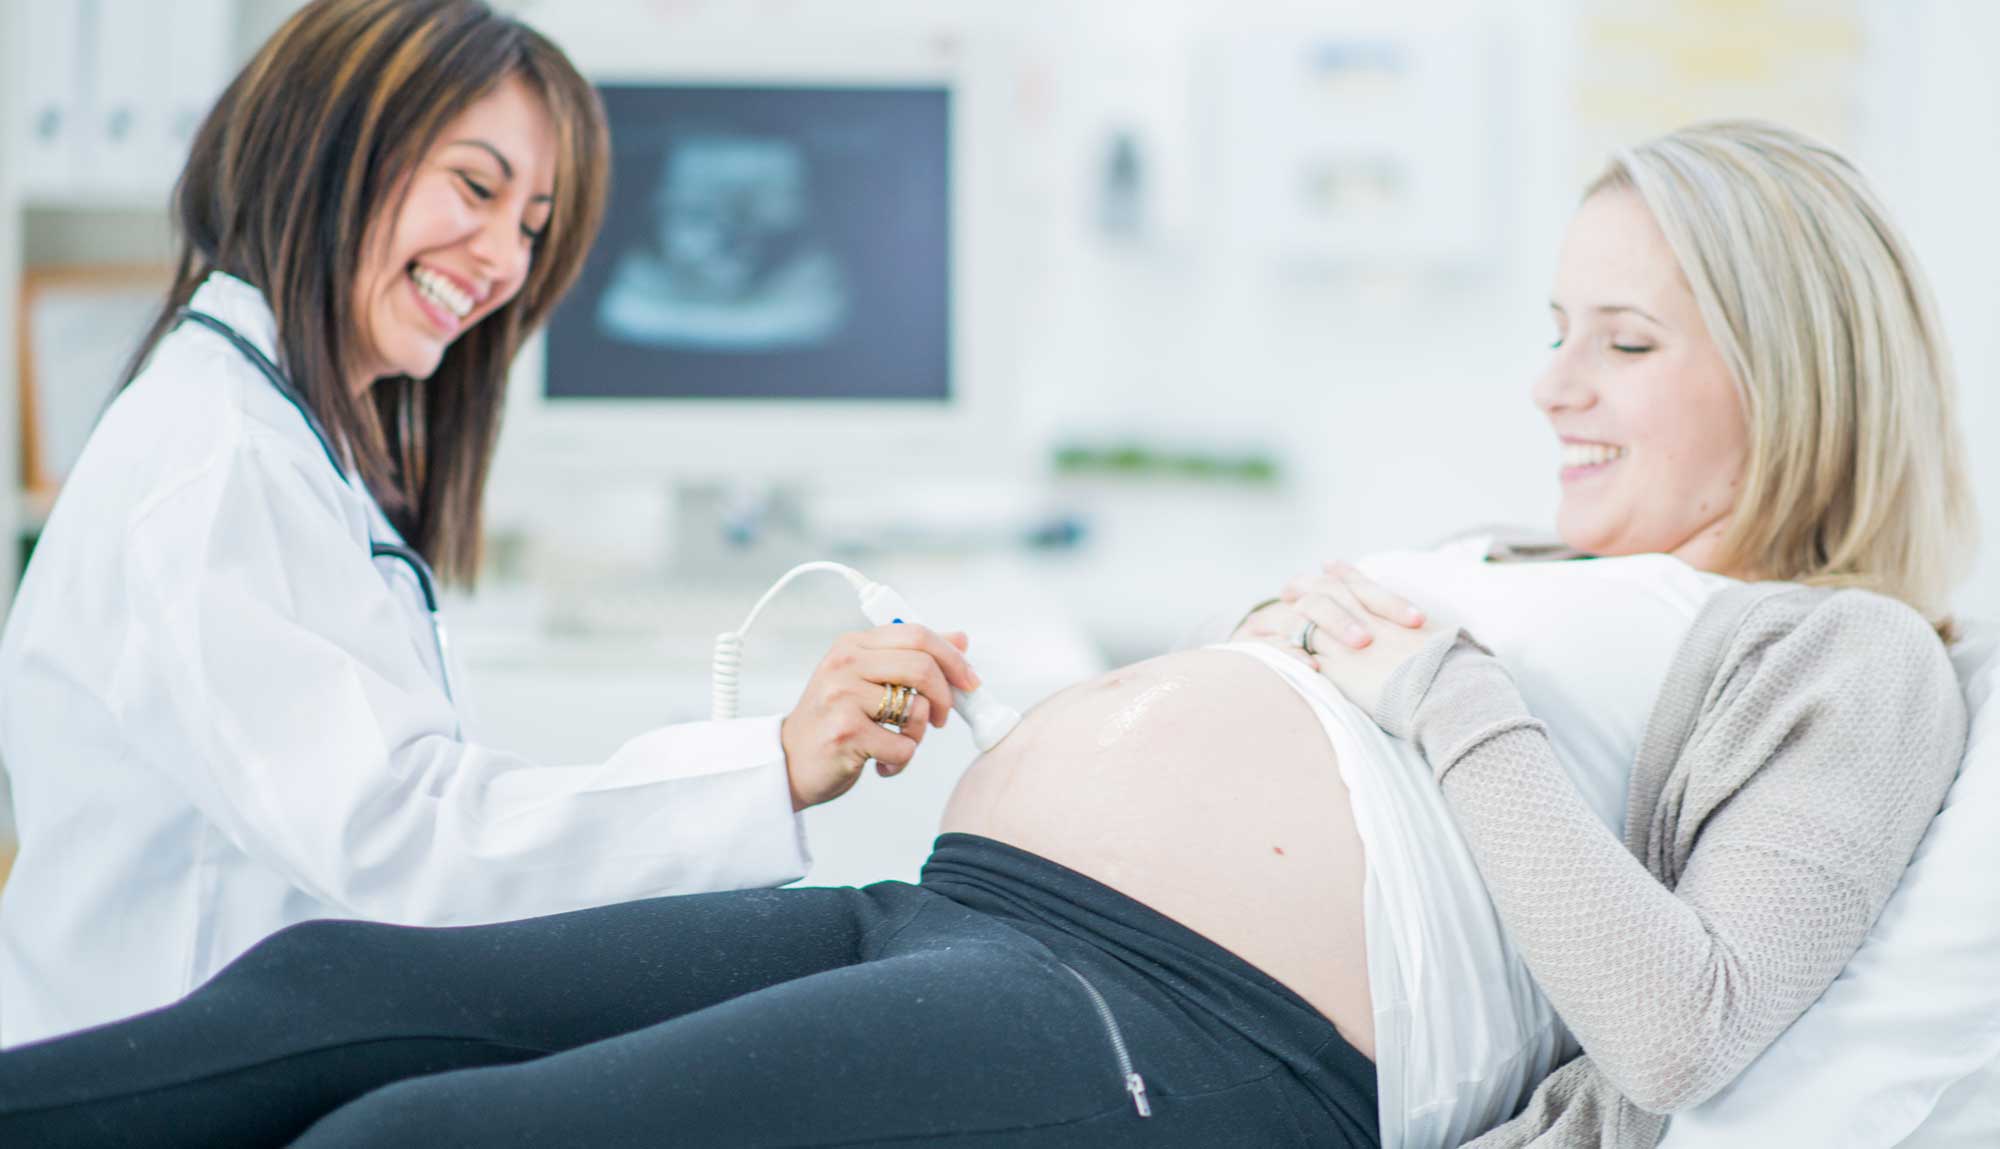 An OB-GYN resident performs an ultrasound on a pregnant patient.